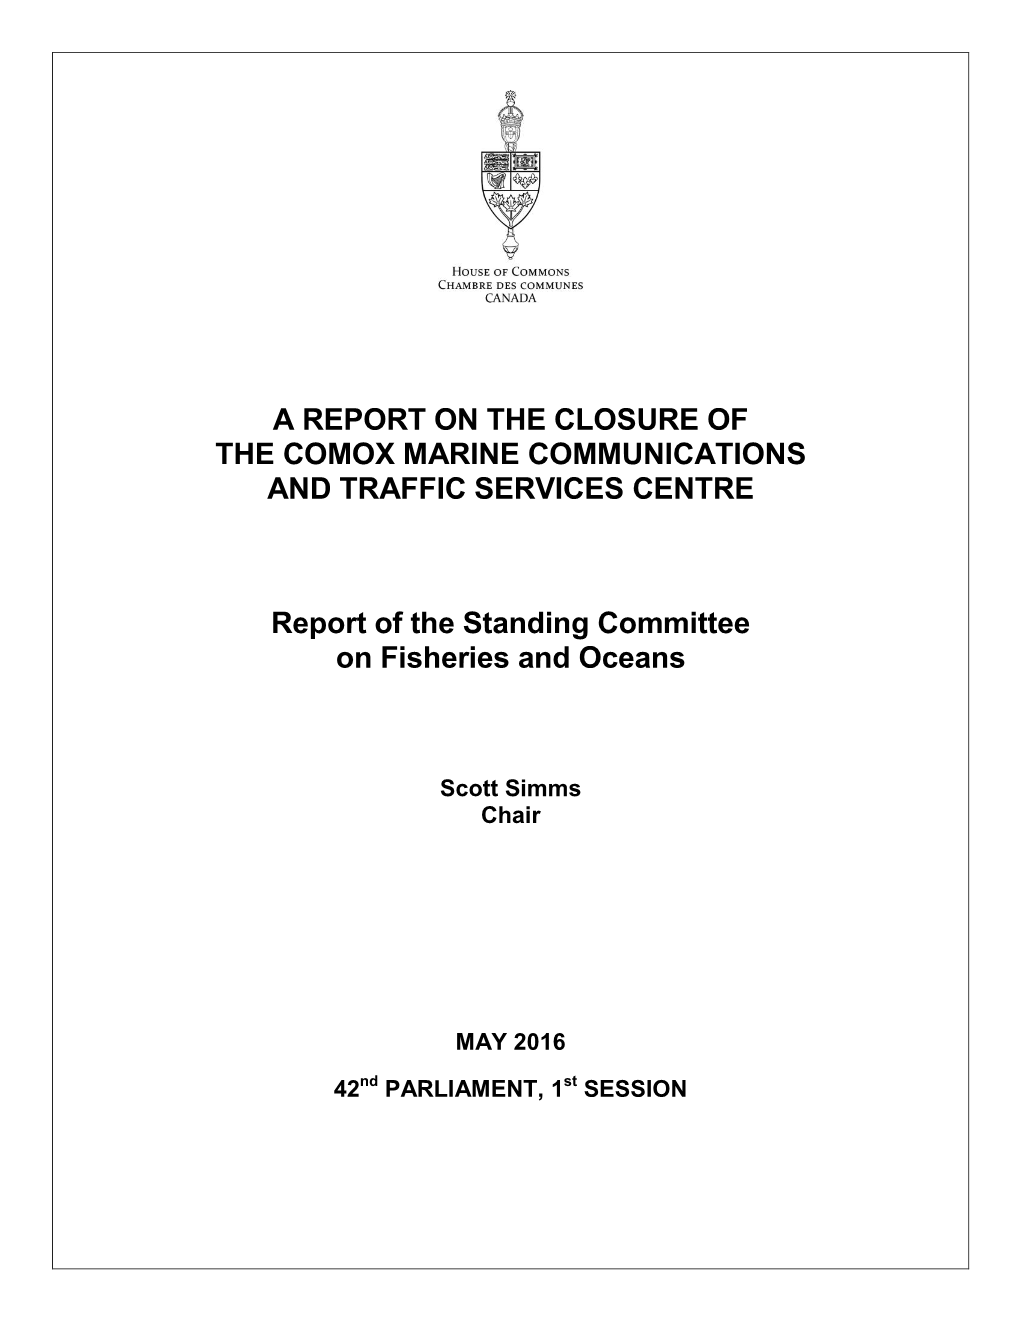 A Report on the Closure of the Comox Marine Communications and Traffic Services Centre